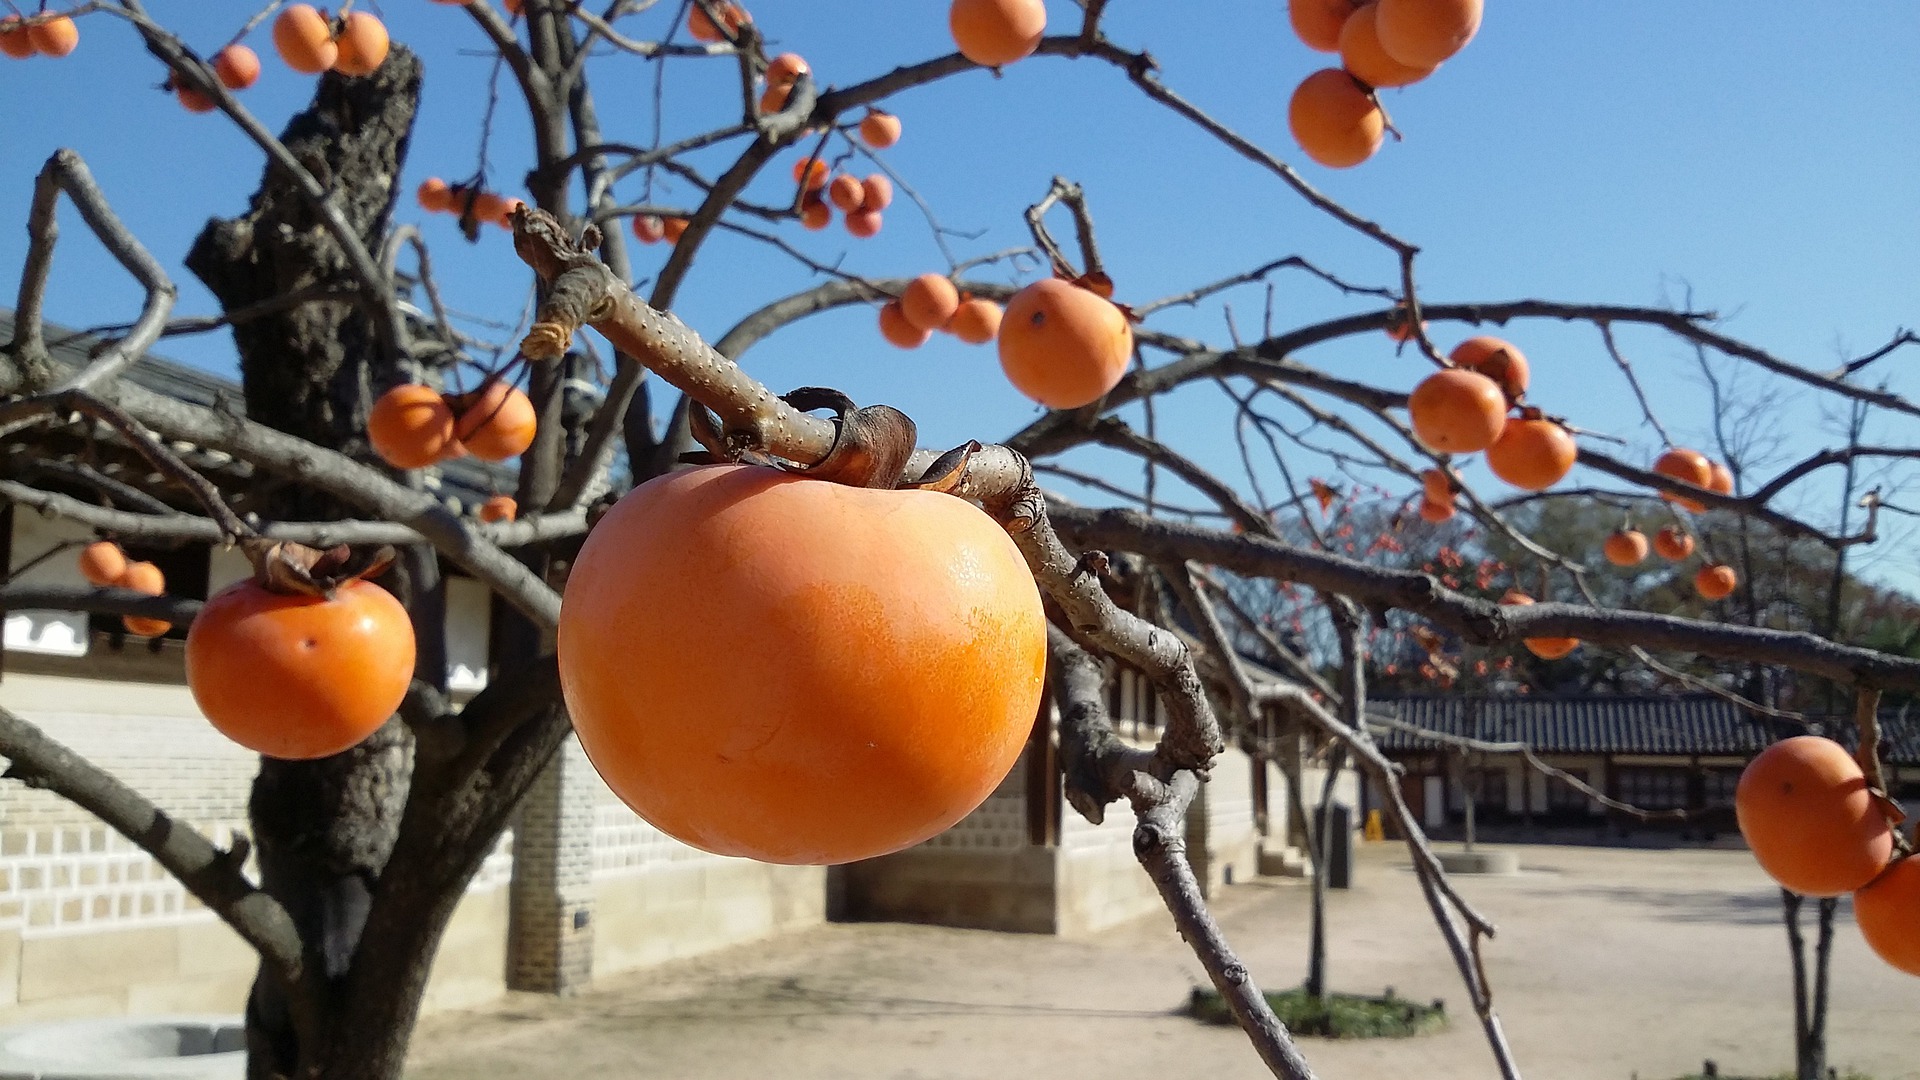 Korea with its persimmons are one of the best fall food destinations
